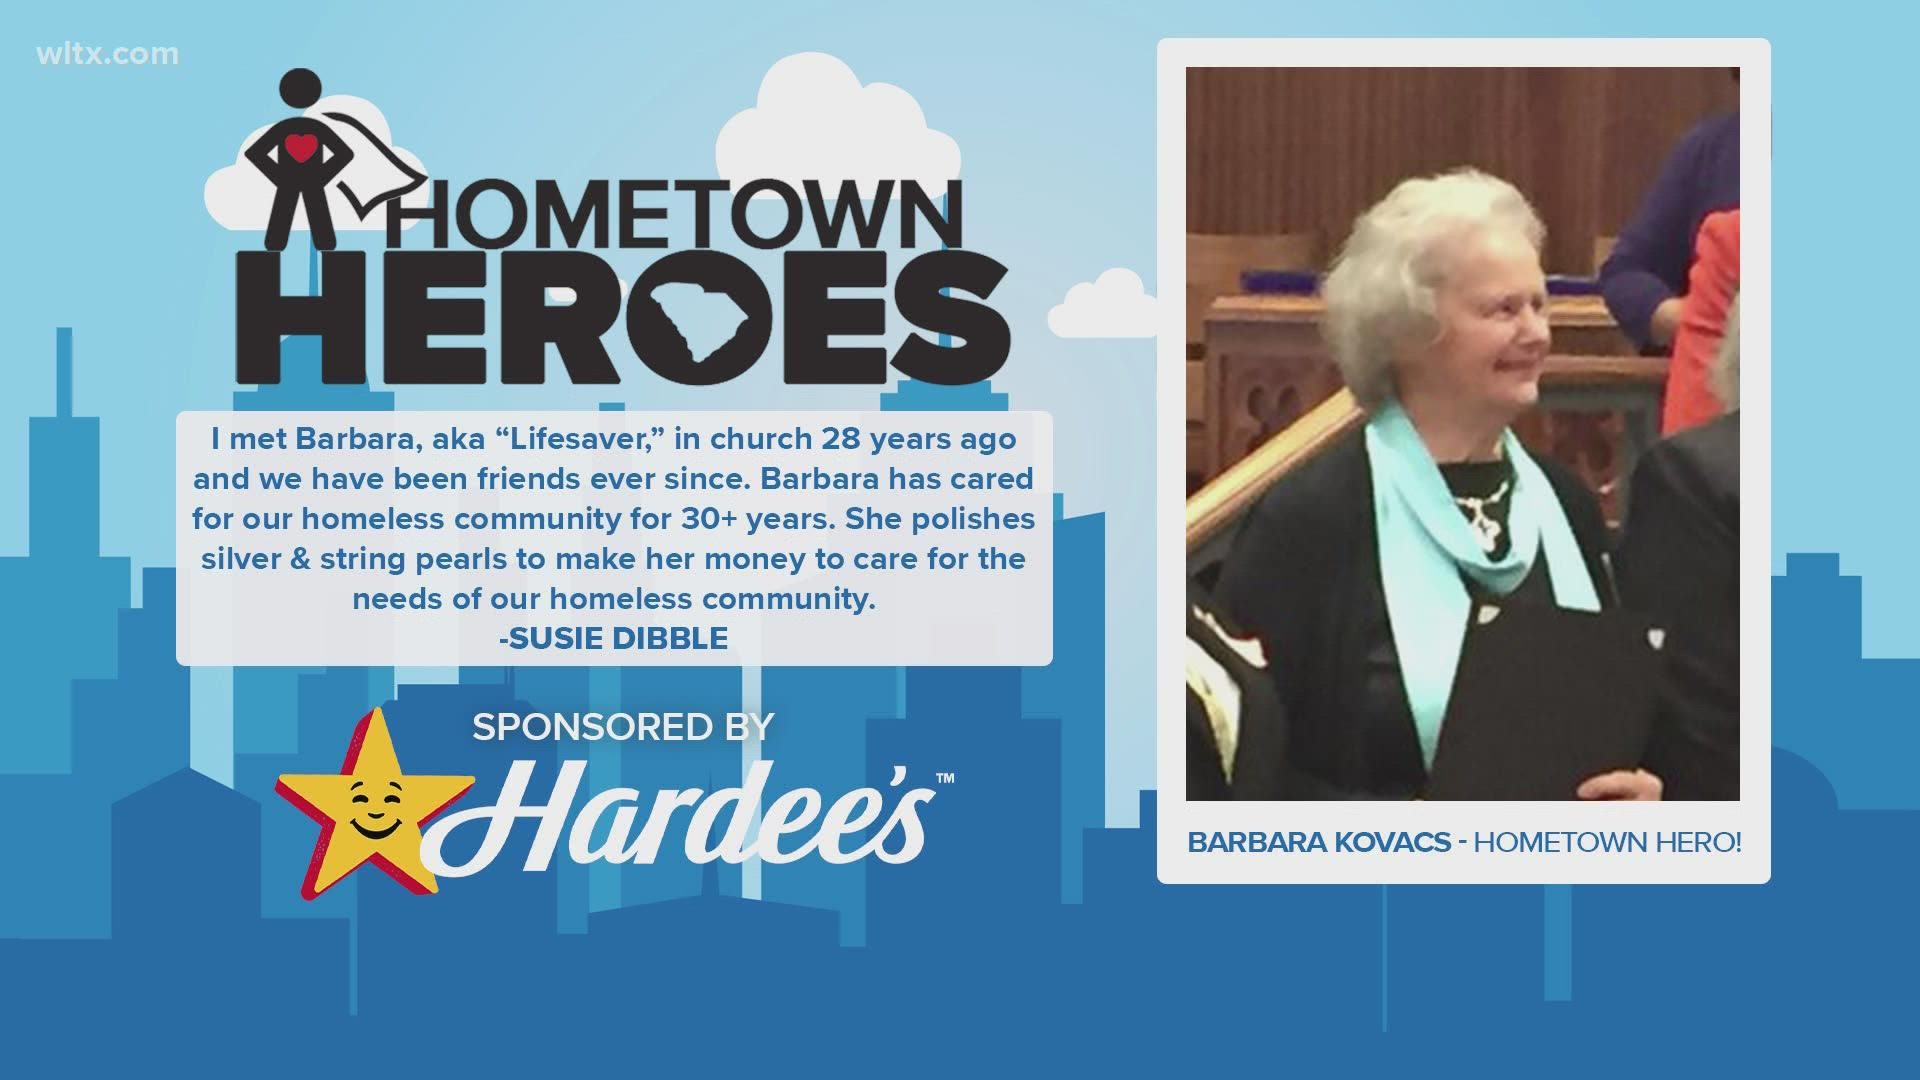 Her friends from church says Barbara's a lifesaver as she's cared for the homeless community for more than 30 years.